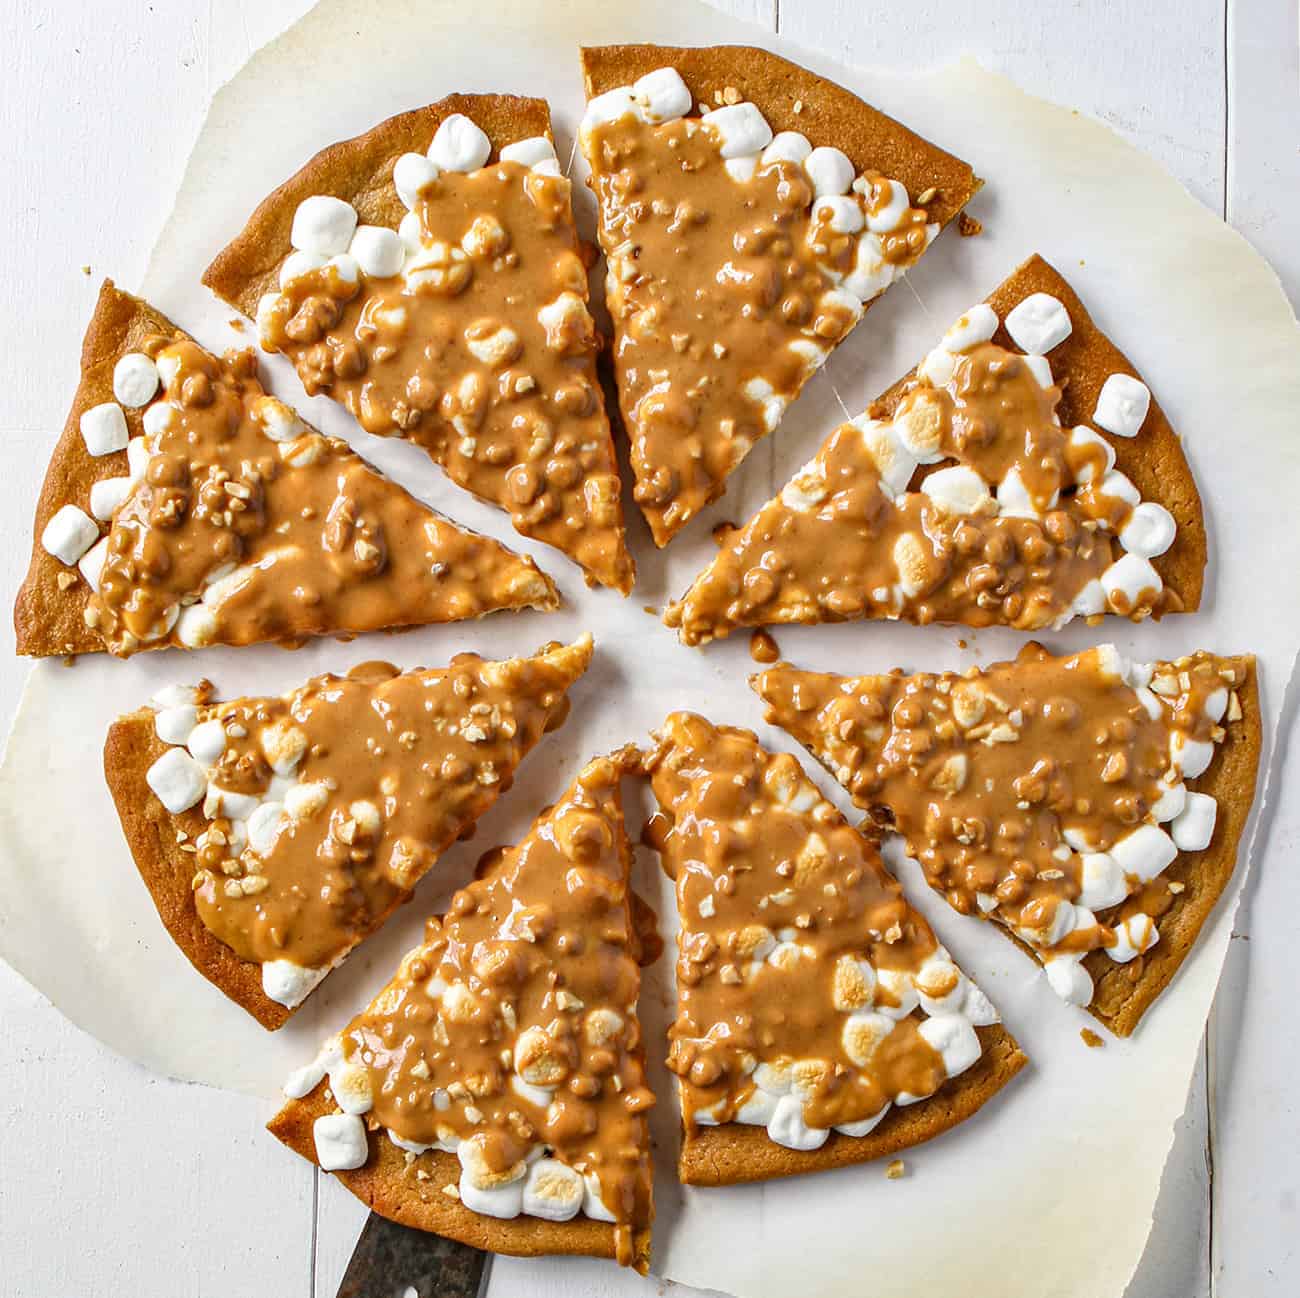 Peanut Butter Marshmallow Dessert Pizza Cut Into Slices and Shot from Overhead Looking Down 